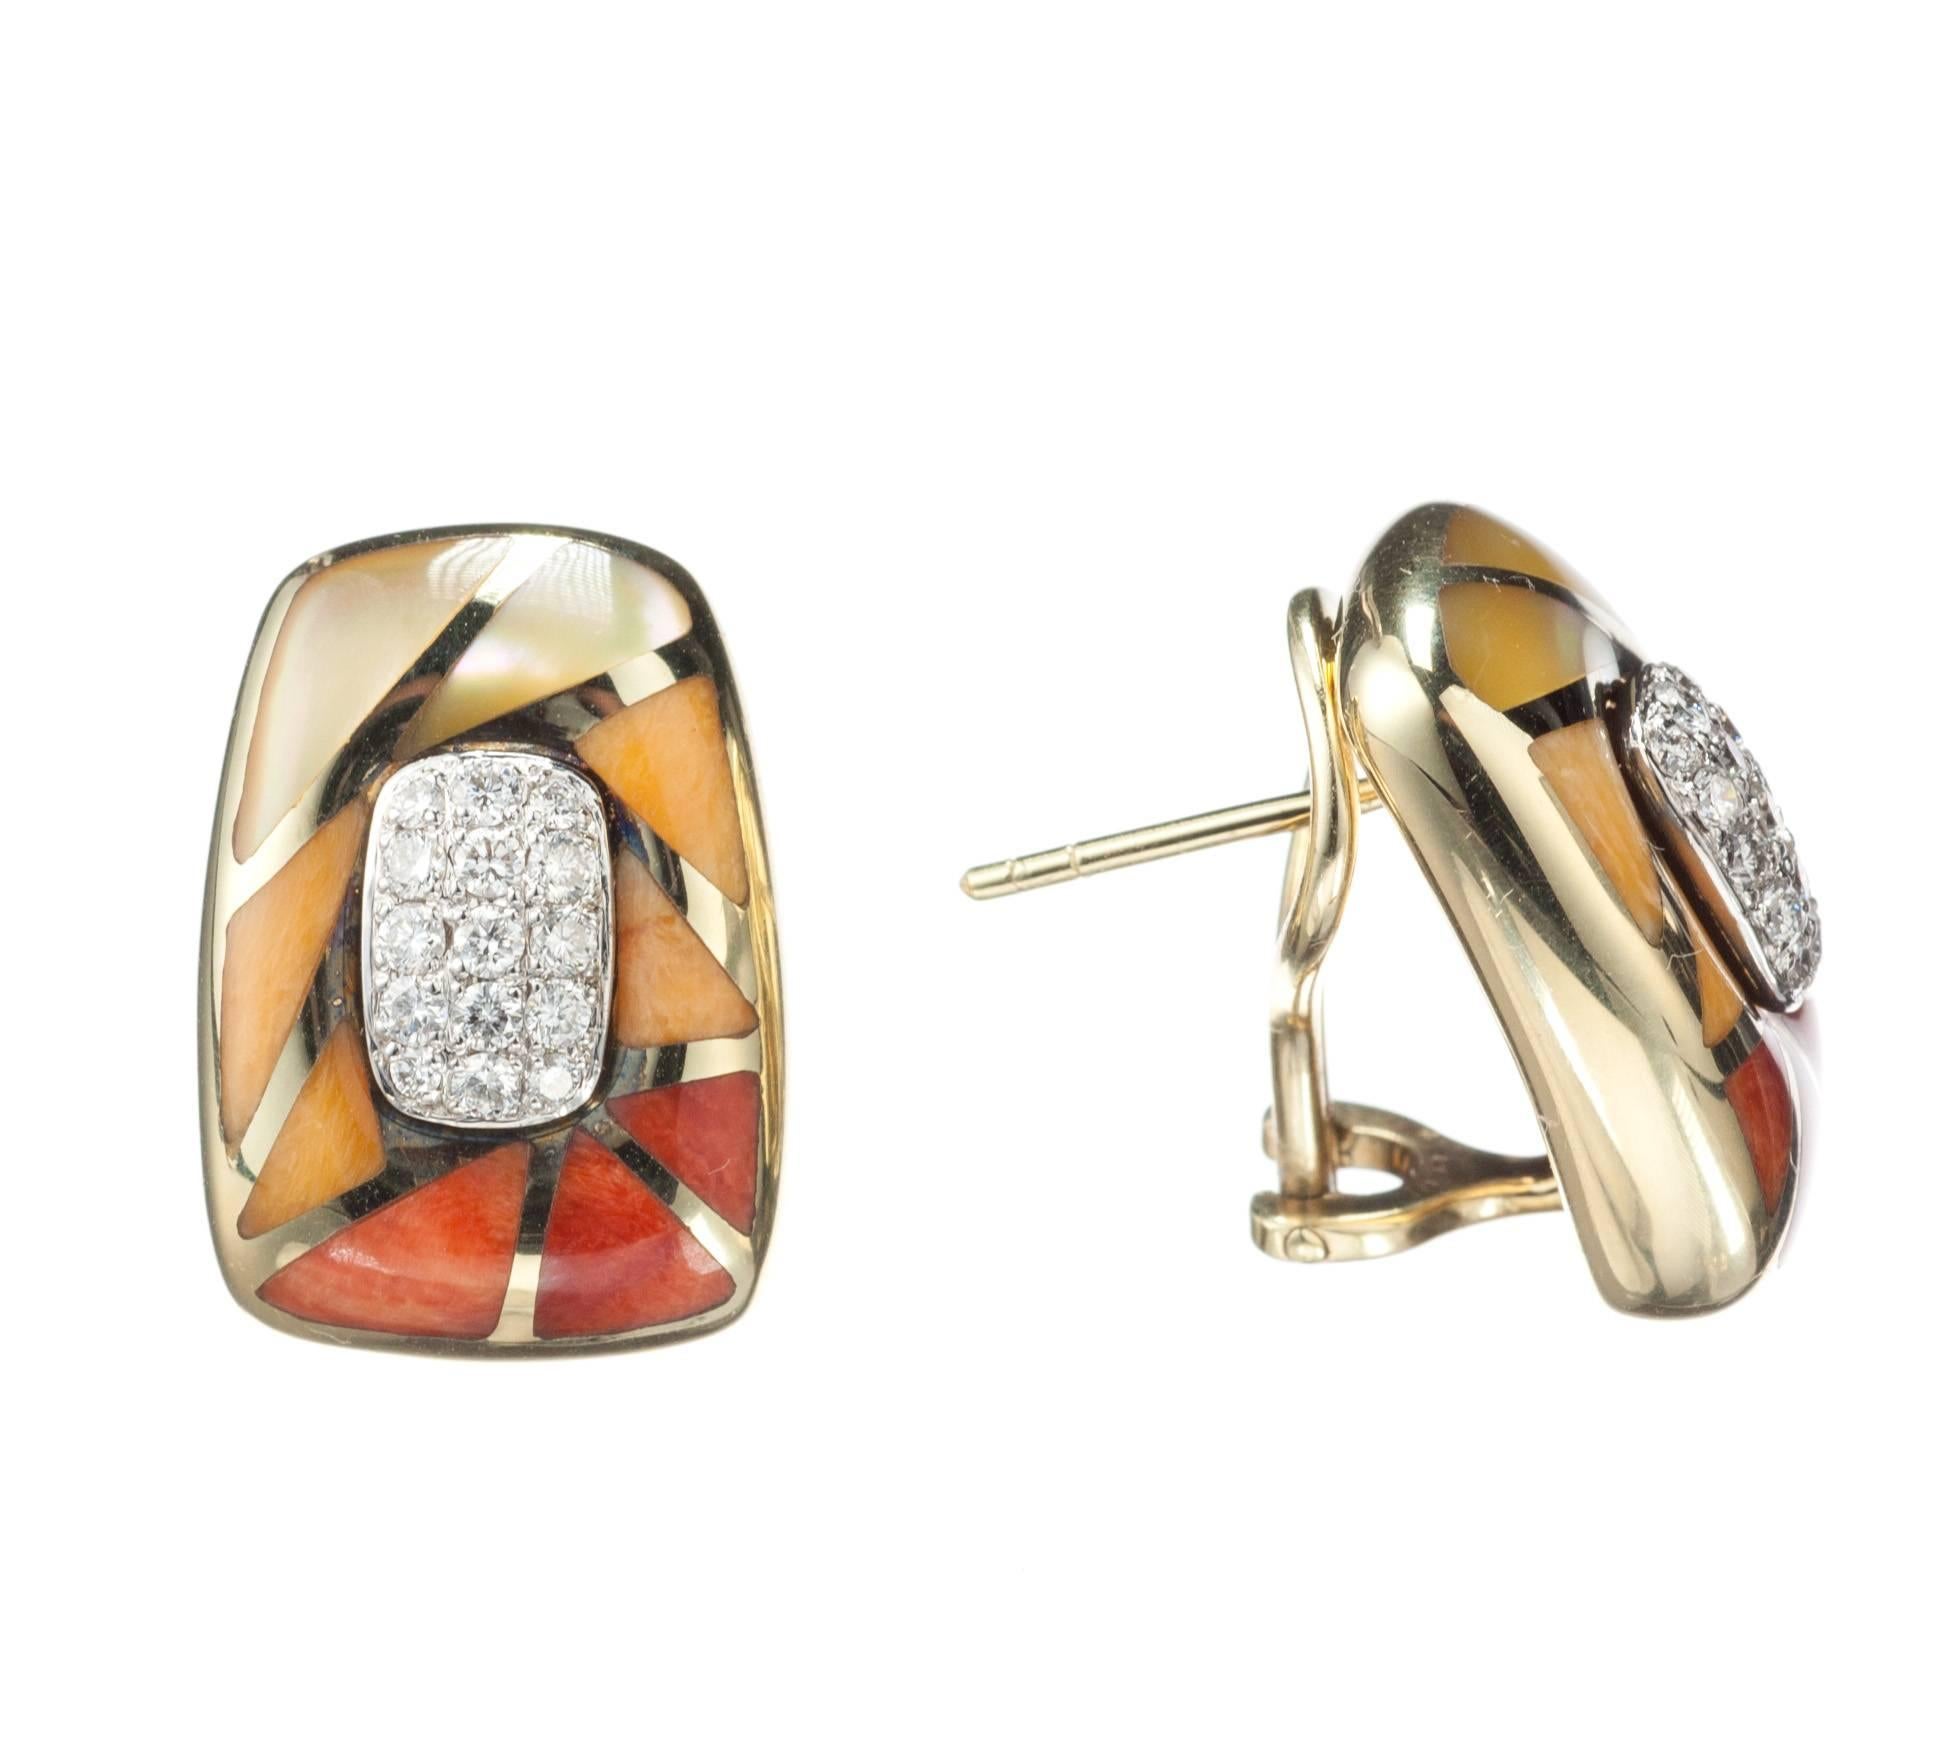 From designer Asch-Grossbardt, a pair of 18-karat yellow gold earrings are inlaid with precise attention to detail. Red and orange spiny oyster, as well as luminous mother-of-pearl and 30 brilliant-cut round diamonds, .38ctw., make these unique